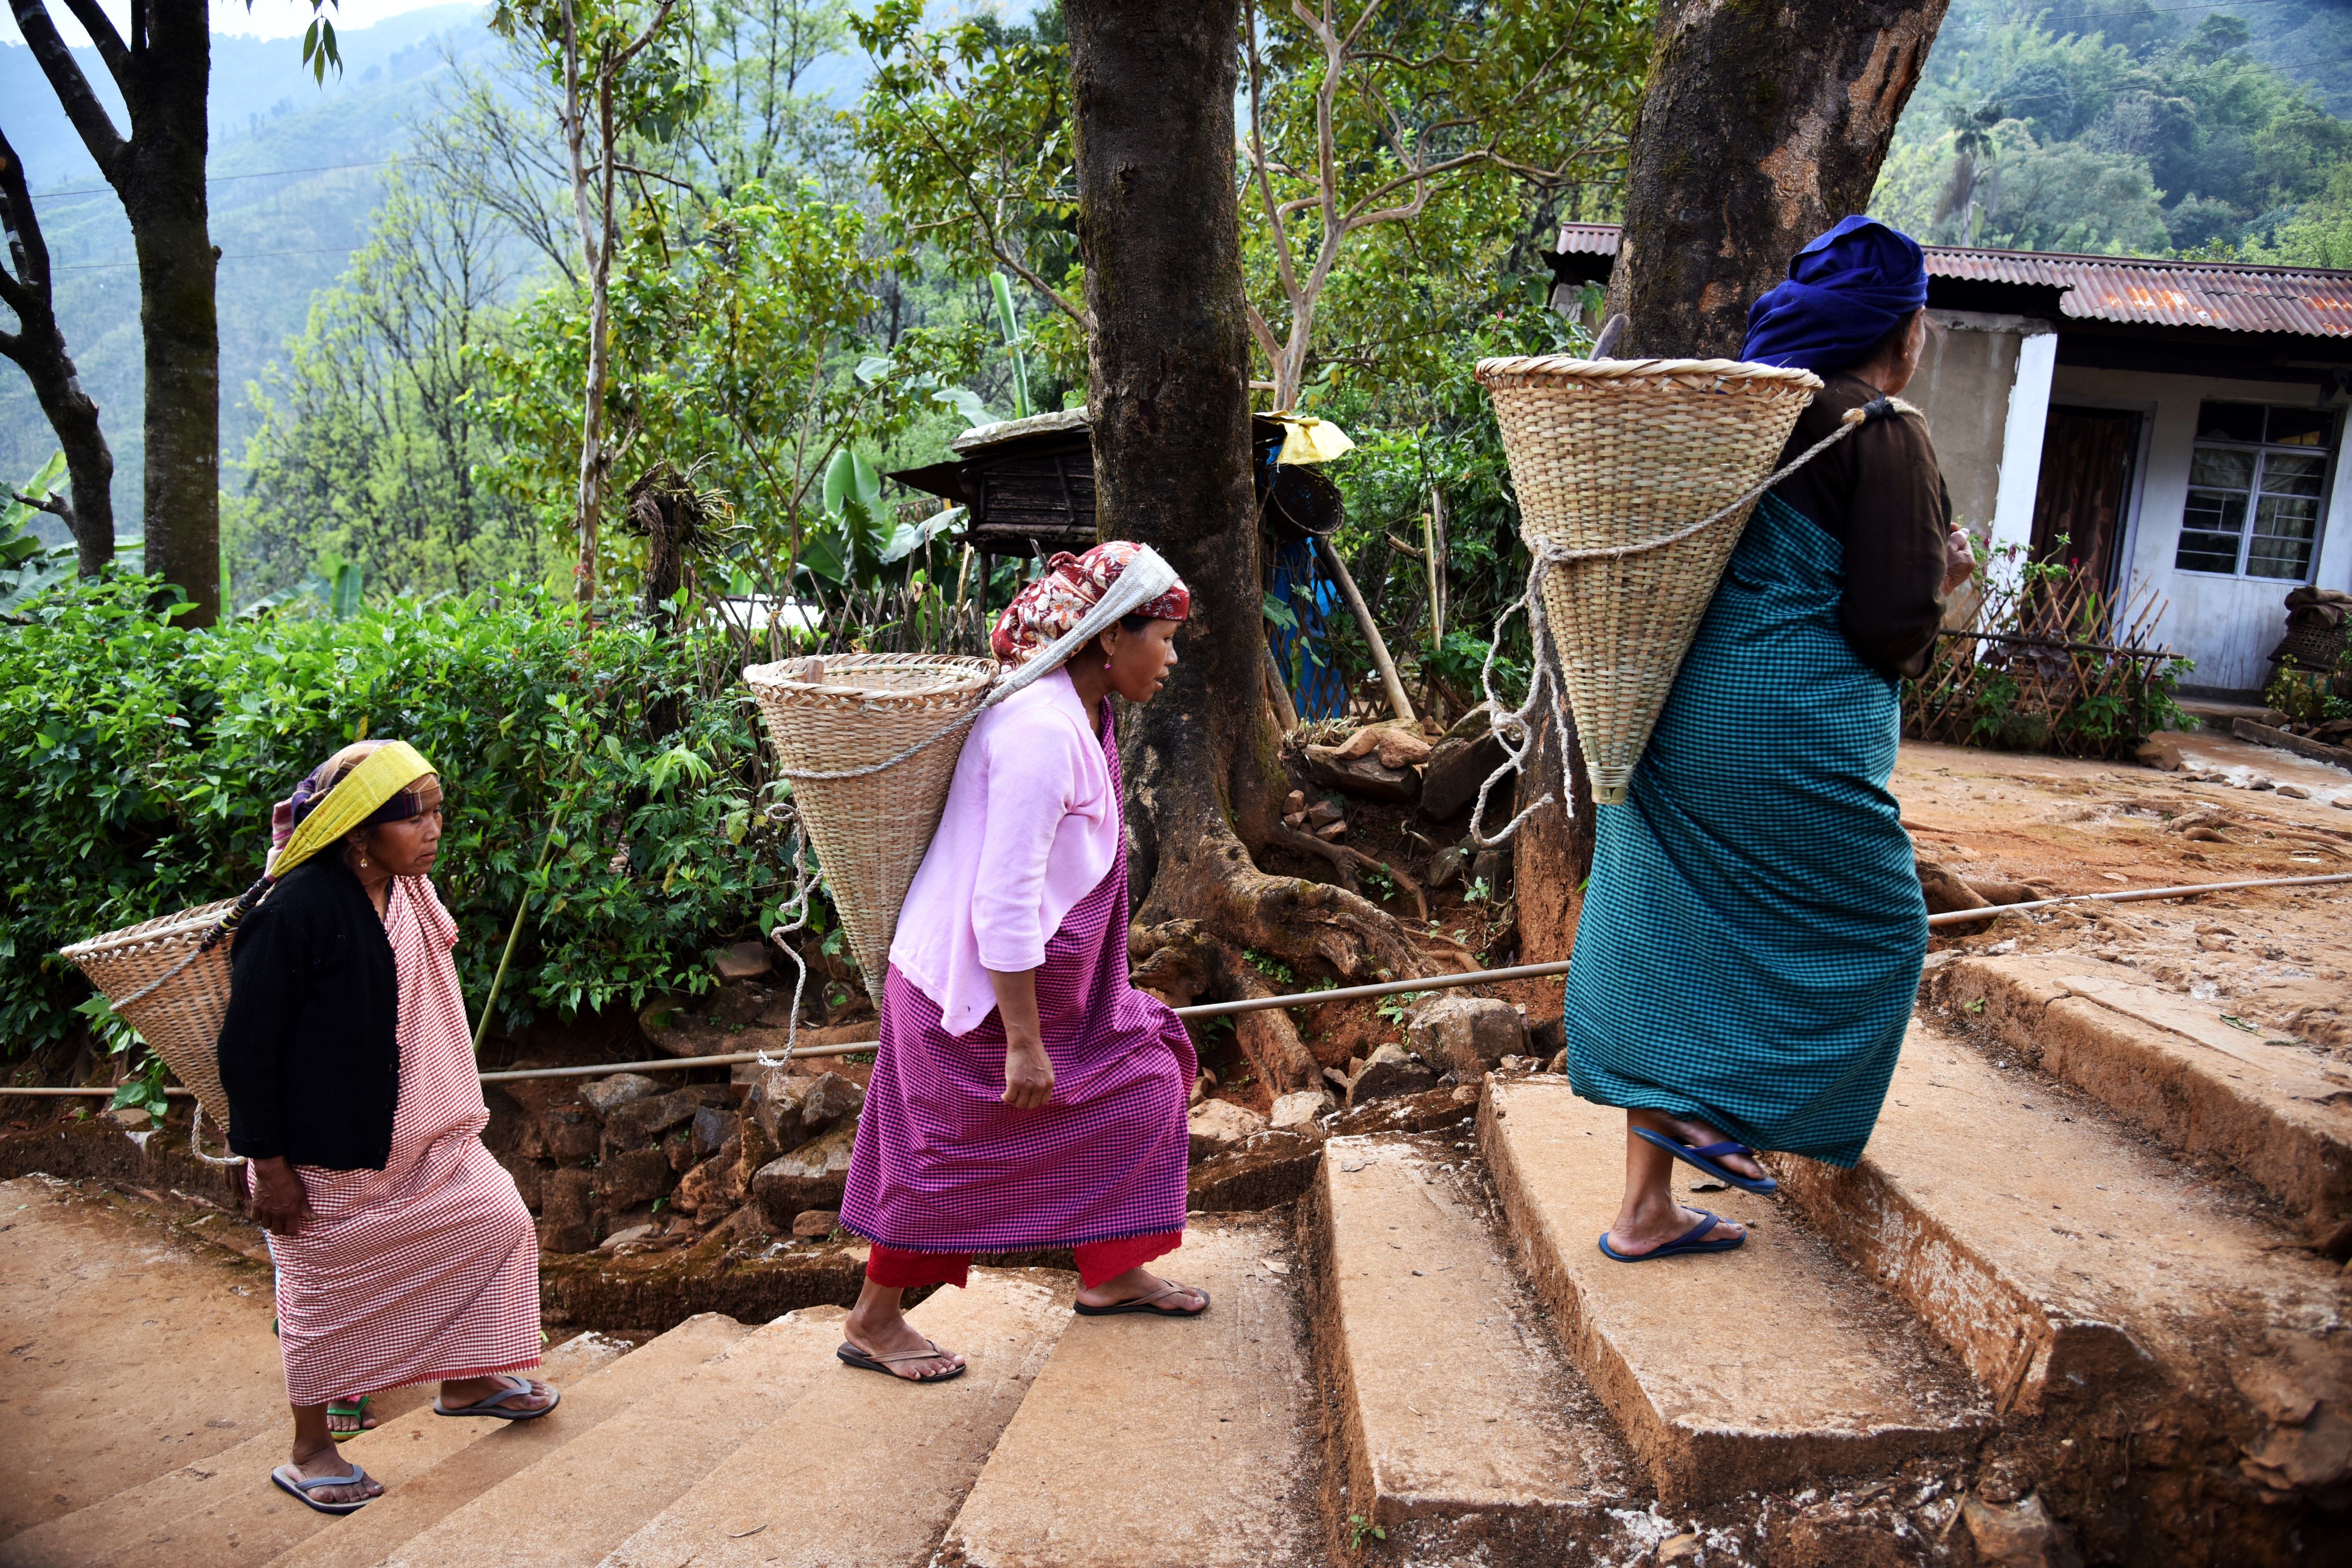 Khasi women leave their village of Nongtraw in India’s northeastern Meghalaya state to collect herbs from the fields. Photo: AFP